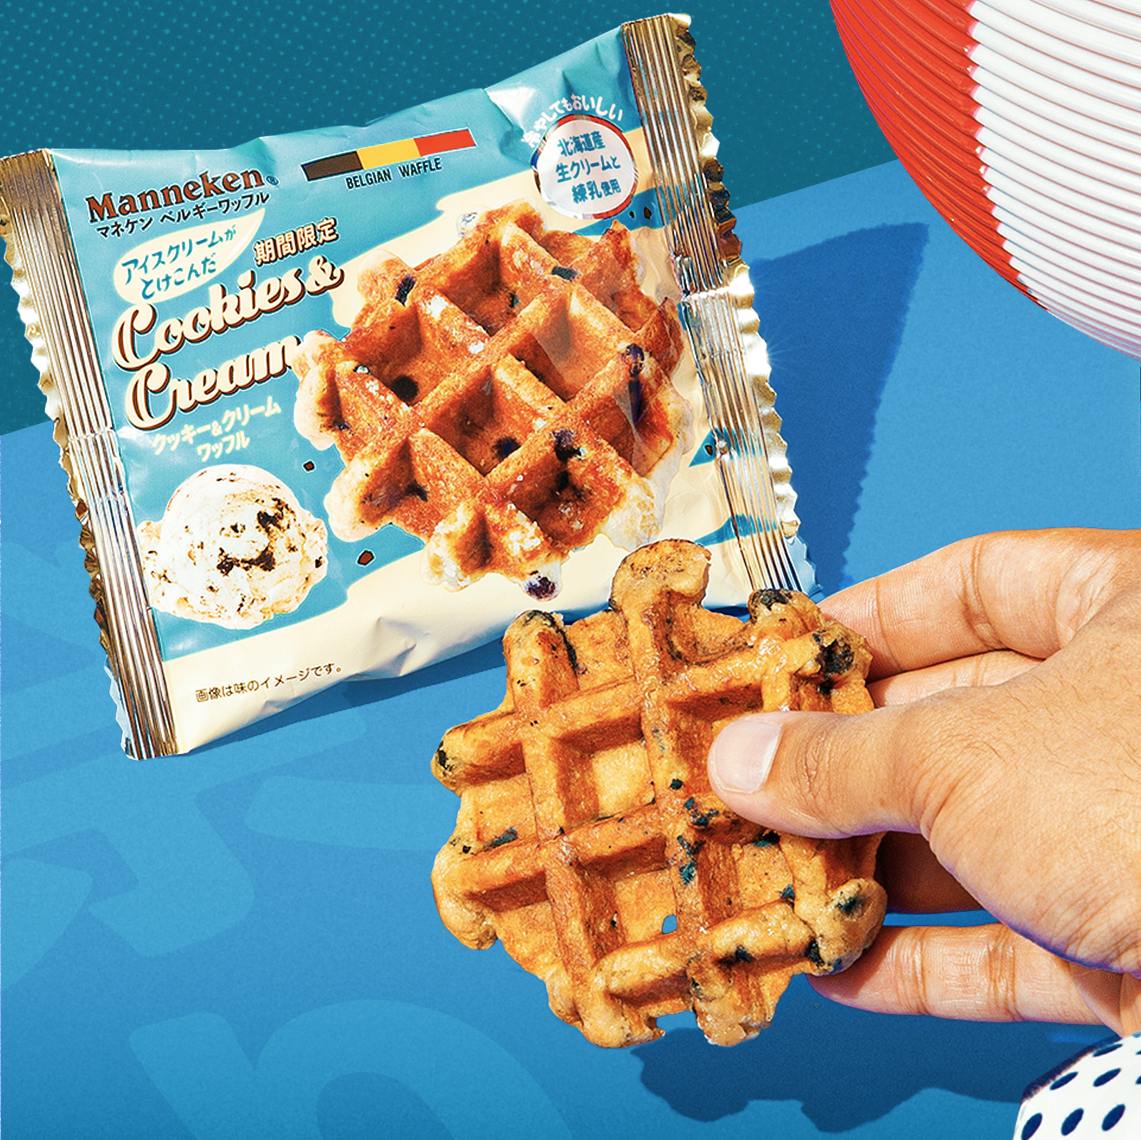 Manneken Waffle Cookies and Cream sits on a blue background, surrounded by Japanese summer festival motifs.